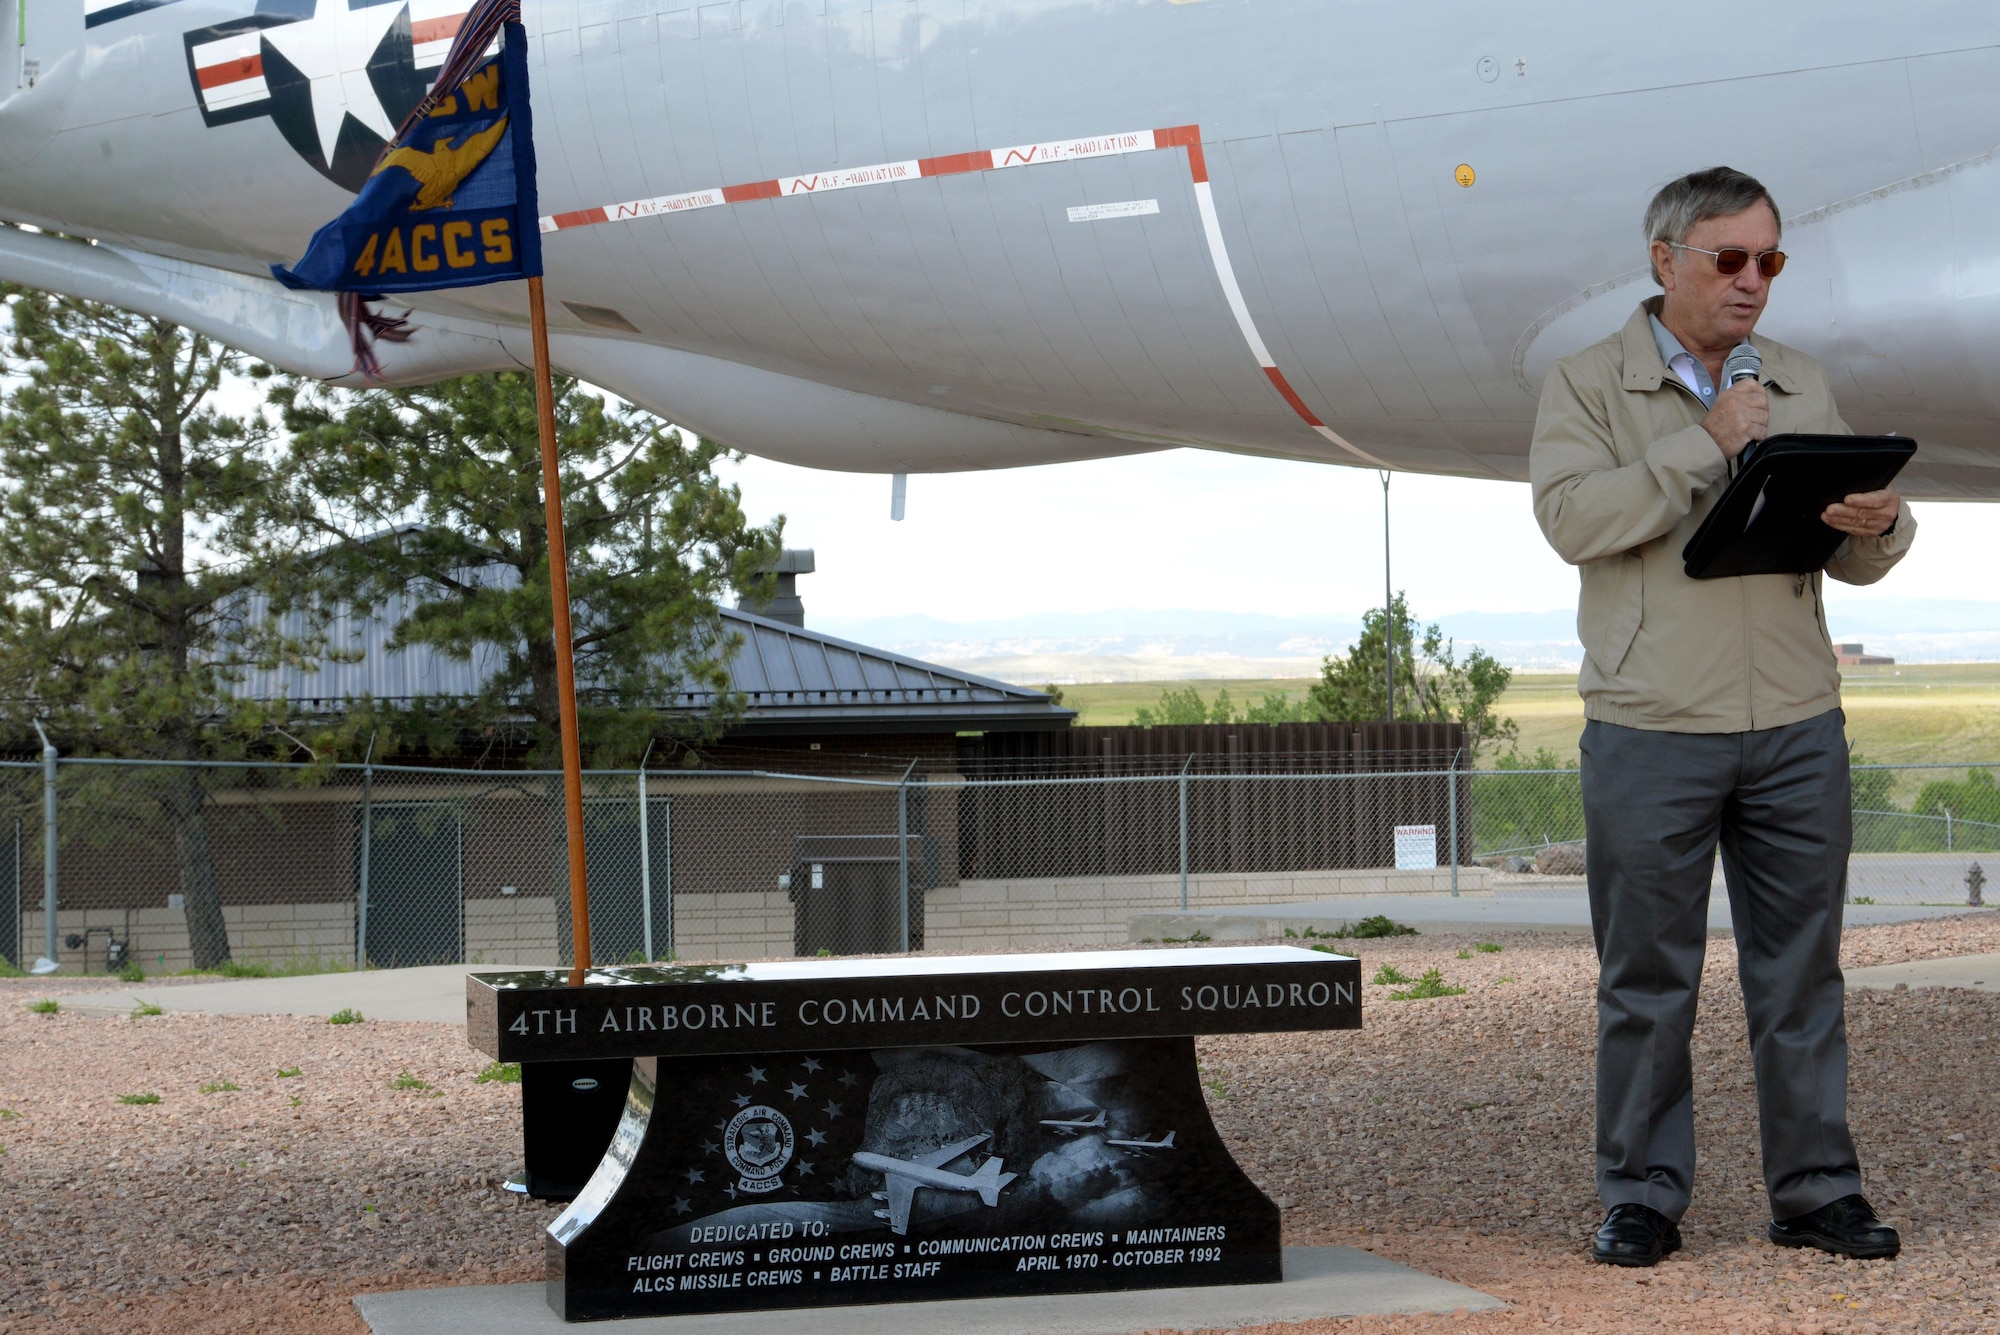 Retired Lt. Col. Richard Hodges, a former 4th Airborne Command Control Squadron commander, speaks at the 25th anniversary of the deactivation of the 4th ACCS at the South Dakota Air and Space Museum, Box Elder, S.D., June 24, 2017. During its nearly 23-year run, the squadron provided an airborne and auxiliary command post and a communications link for 15th Air Force and Strategic Air Command. (U.S. Air Force photo by Staff Sgt. Hailey Staker)